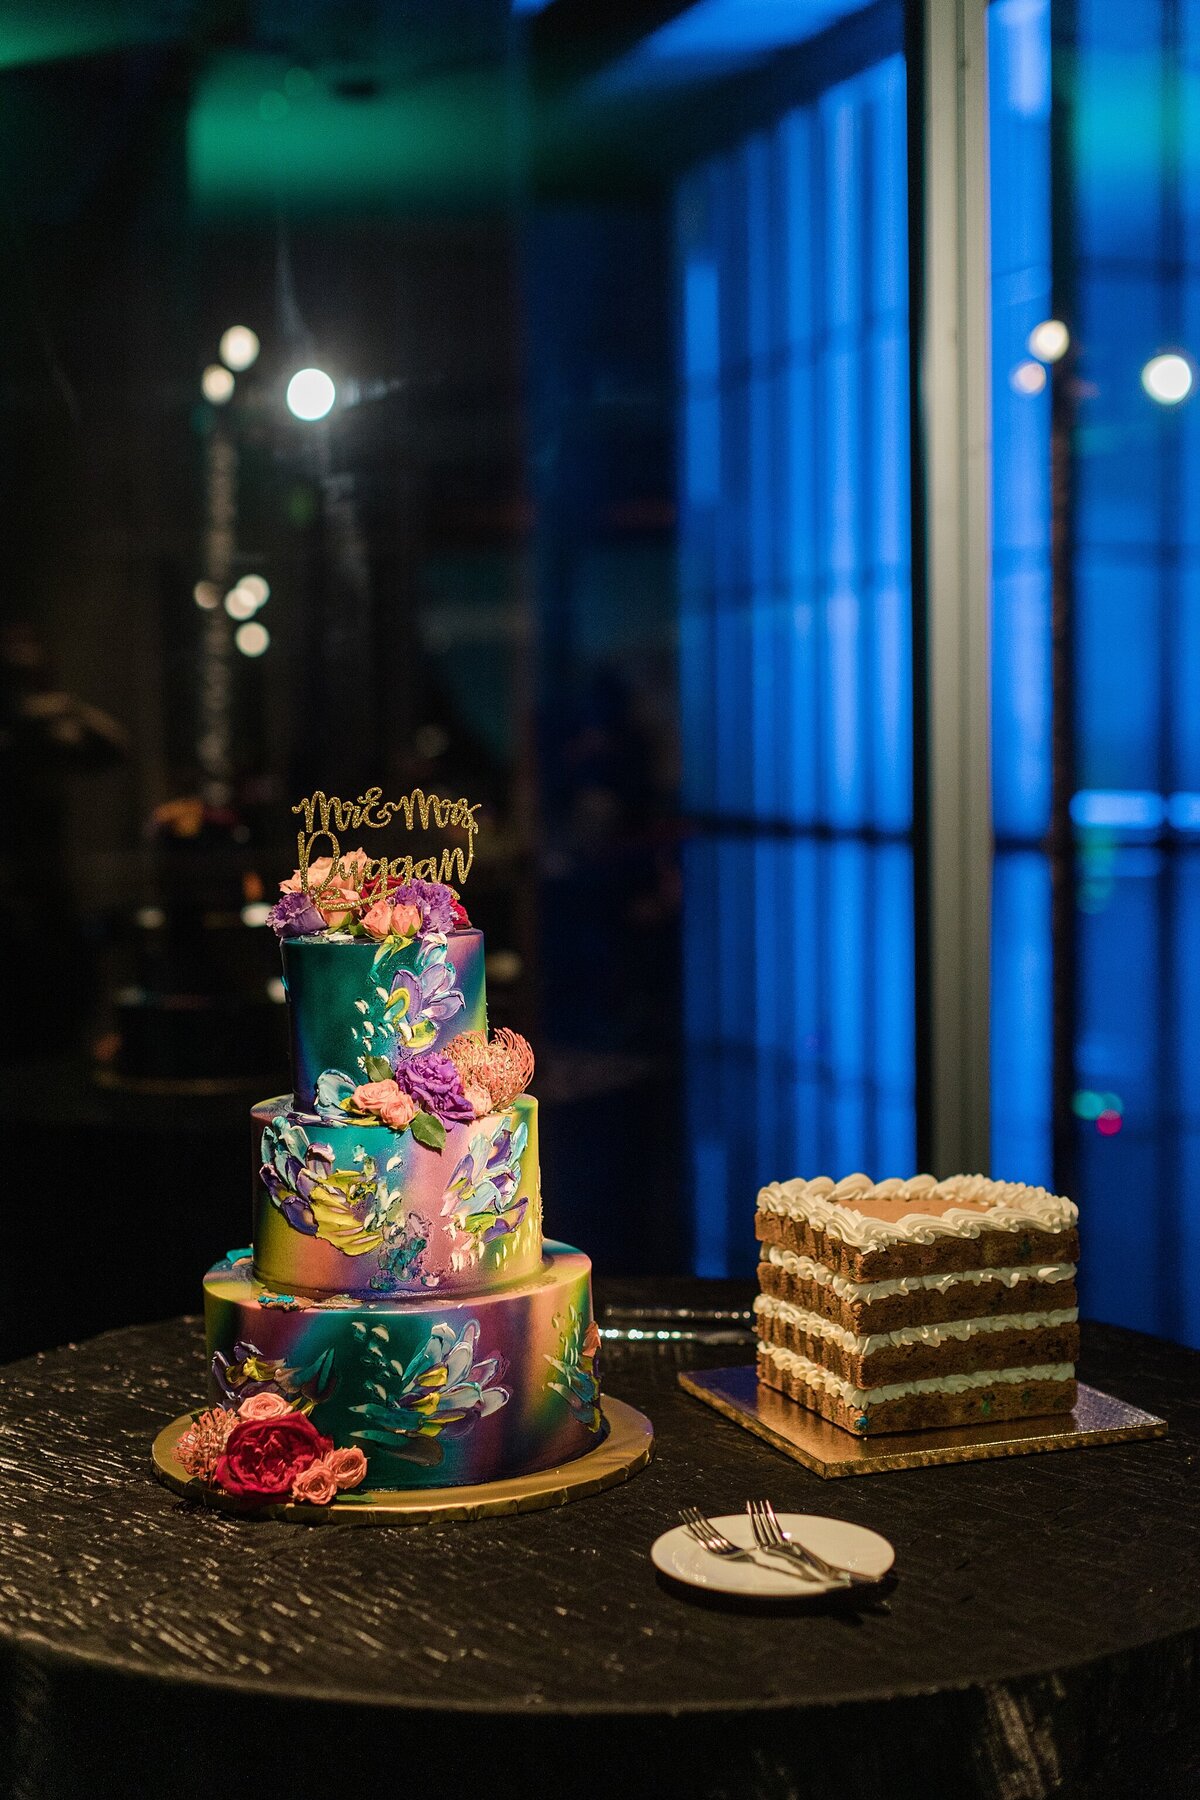 A detail shot of the cake table at a wedding reception at the Modern Art Museum of Fort Worth in Fort Worth, Texas. The cake on the left is a wildly colorful, three tiered cake with colorful flowers and floral decoration with a gold topper show the bride and groom's new last name. The cake on the right is a four tiered cookie cake with white icing trimming the edges.